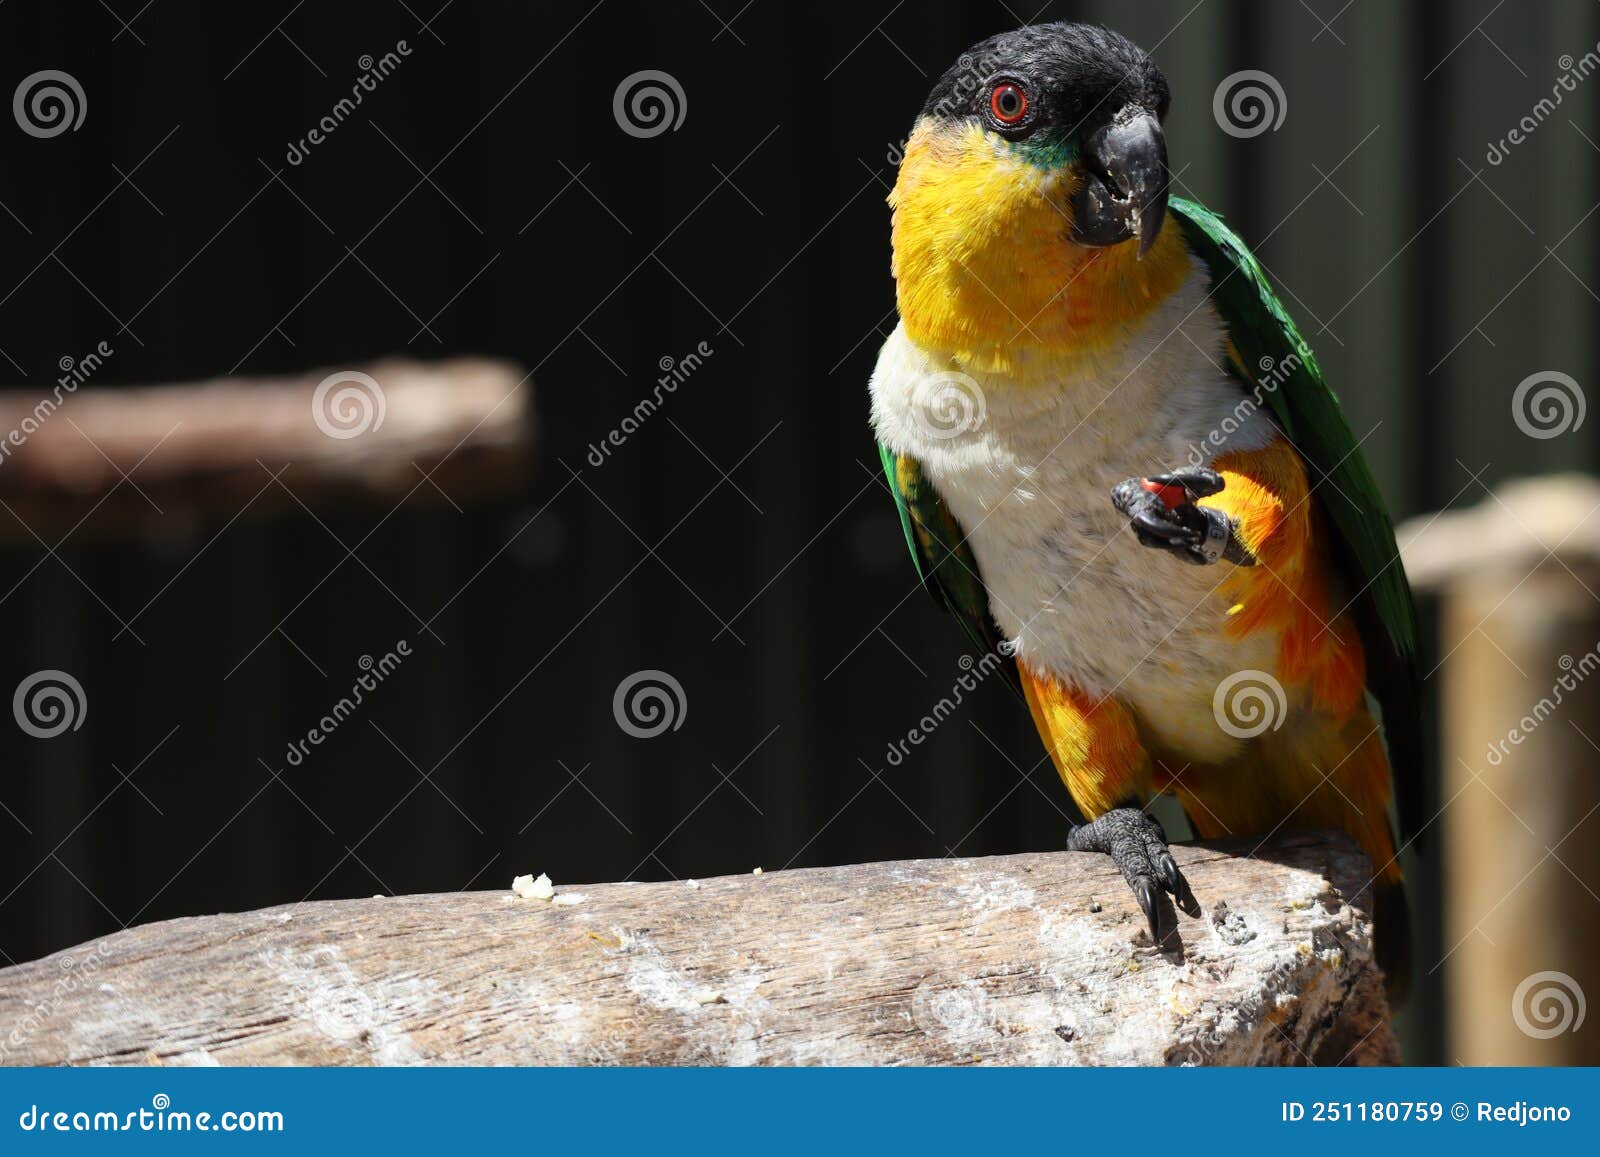 216 Caiques Stock Photos - Free & Royalty-Free Stock Photos from Dreamstime